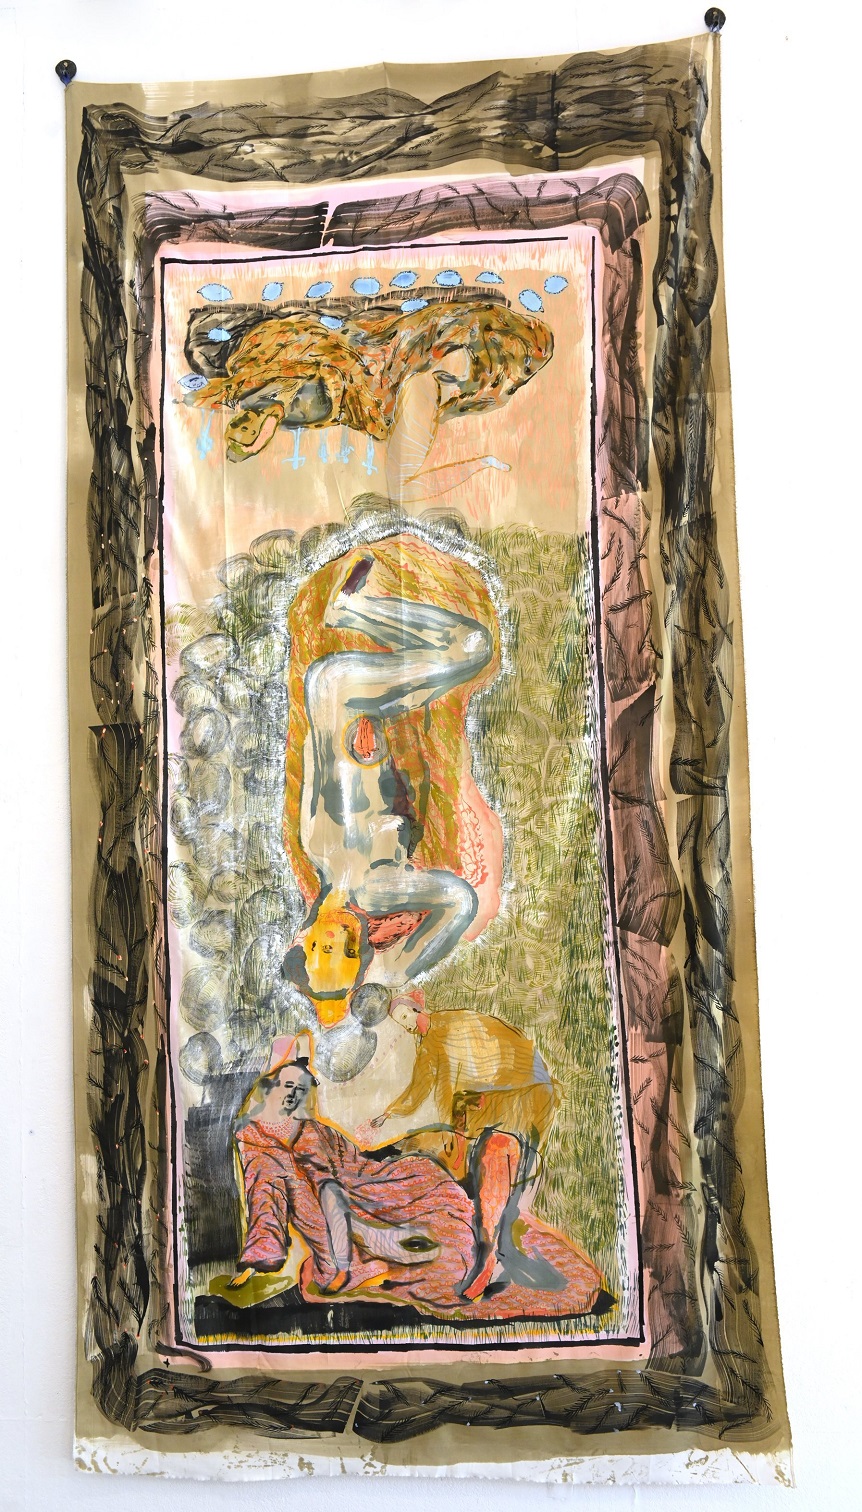 A hand-painted silk wall-hanging by artist Nichola Shanley.